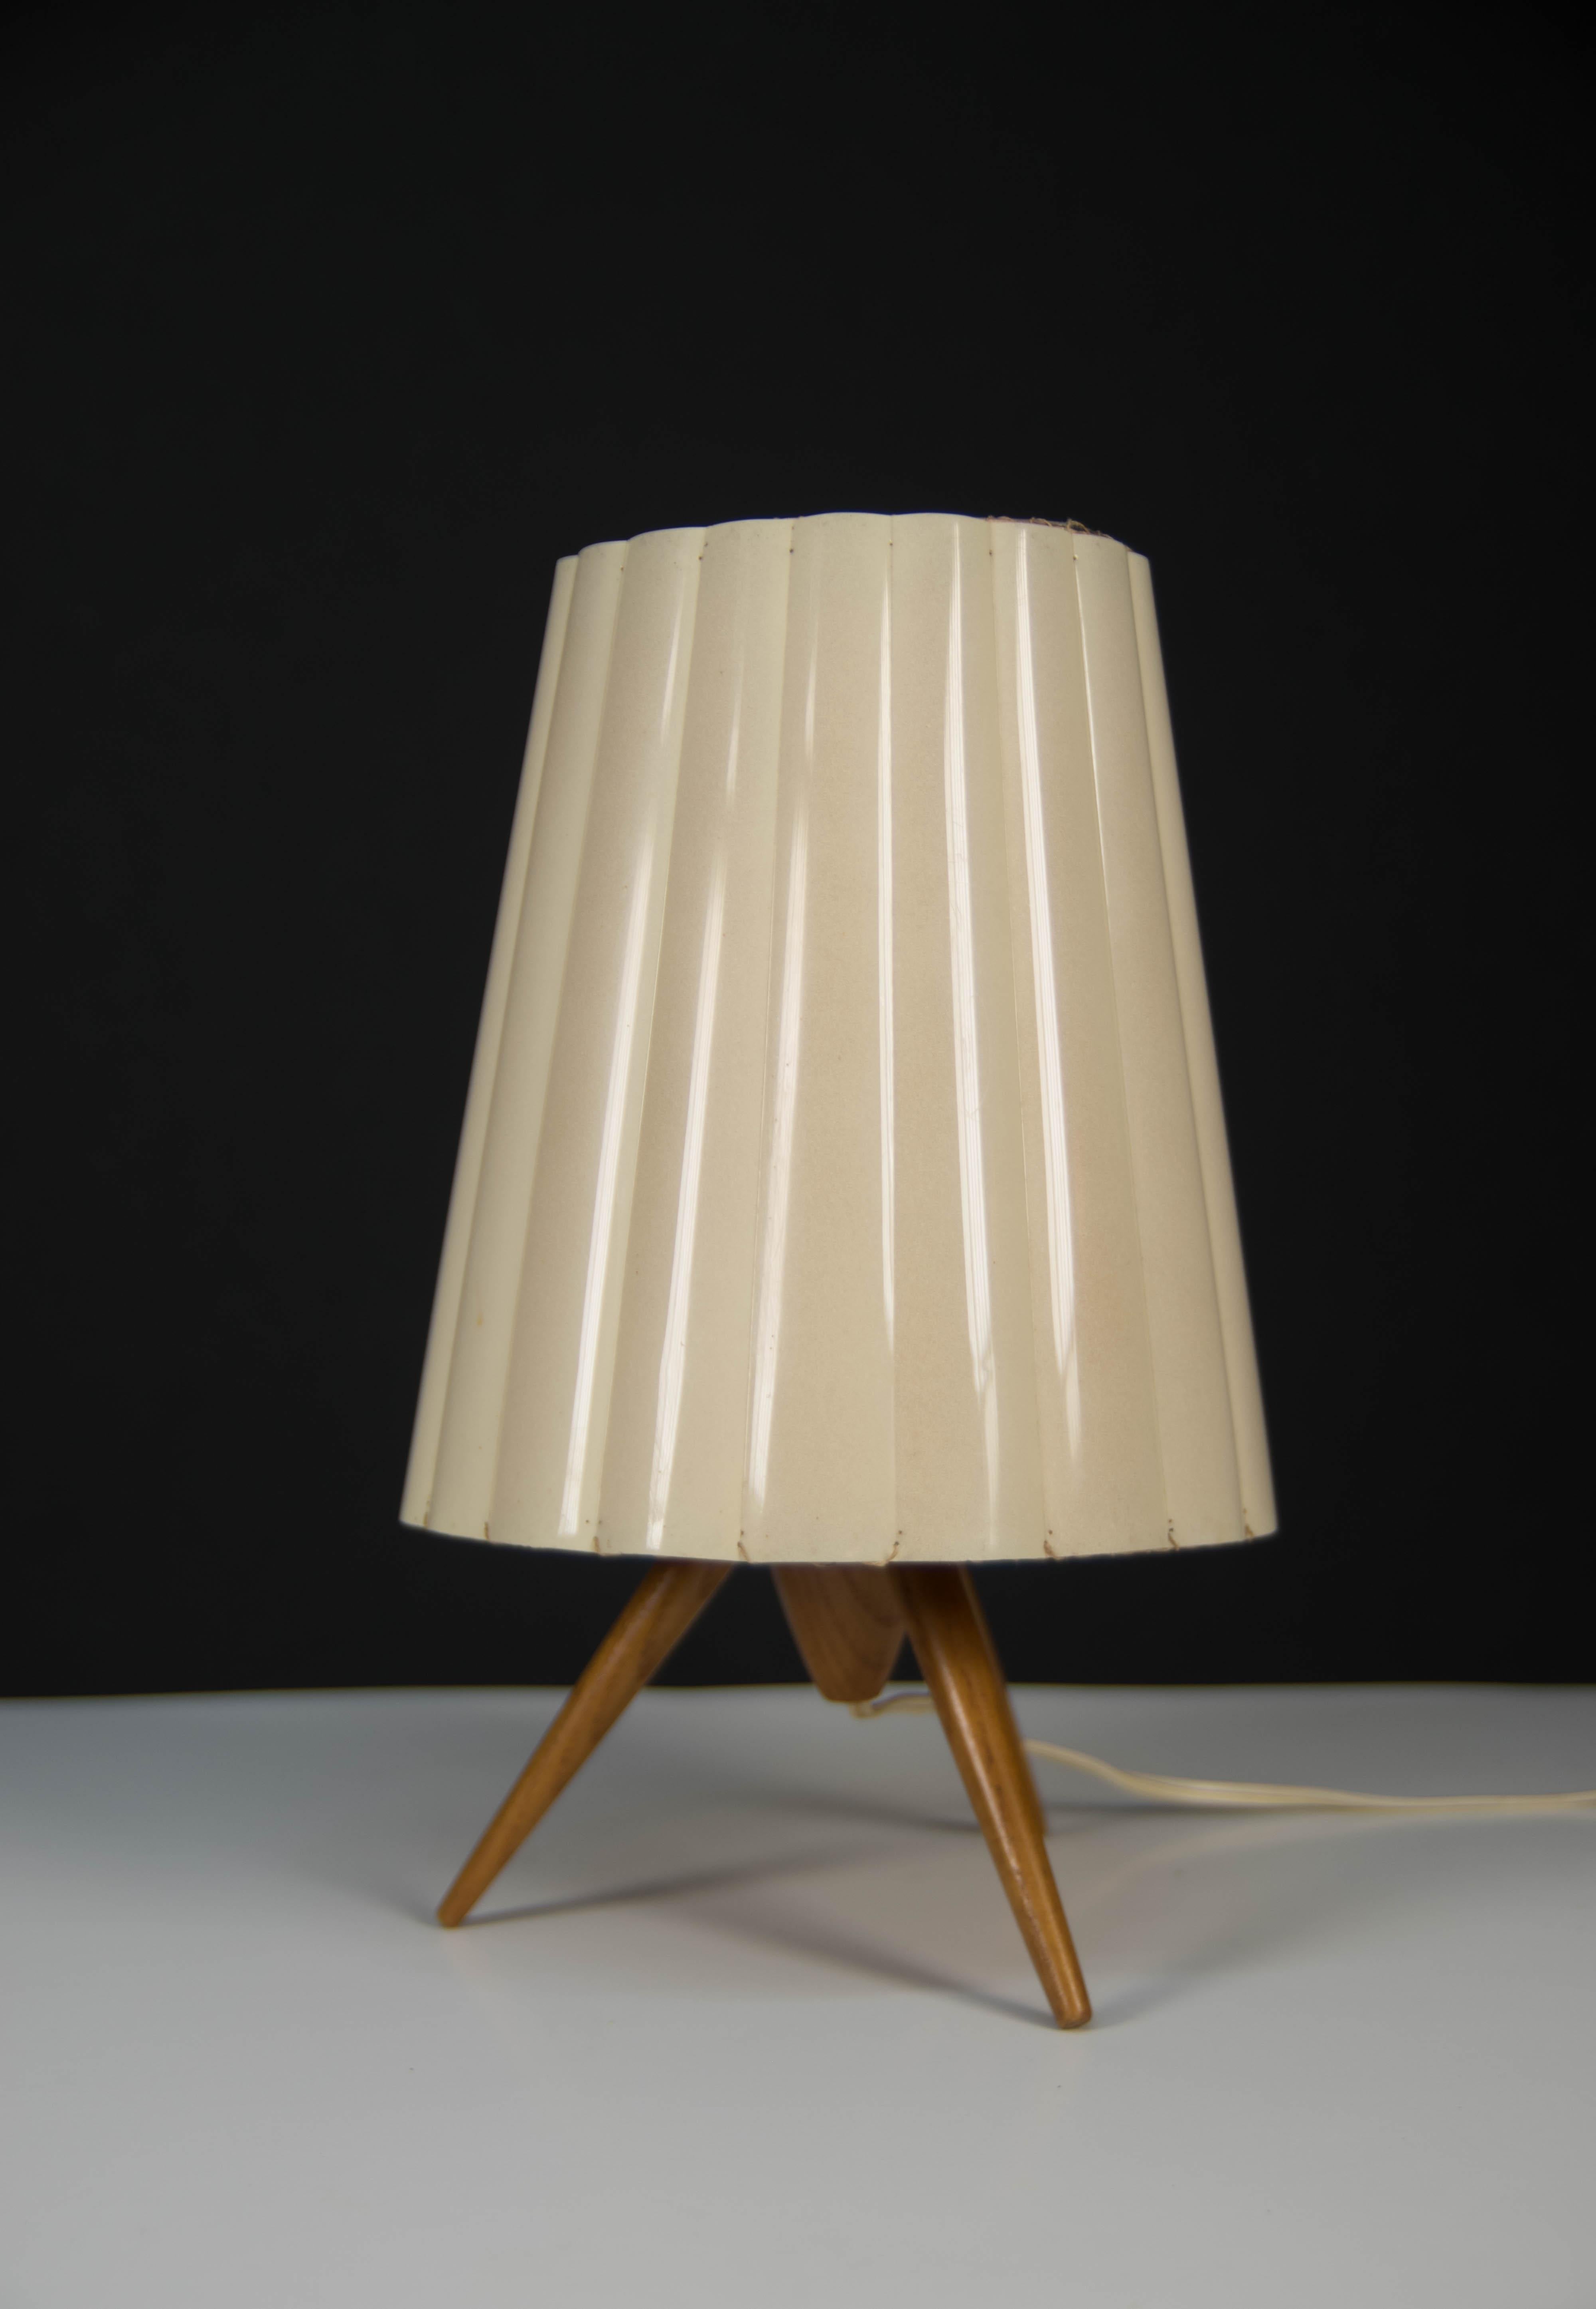 Czech Bedside or Table Lamp, 1960s